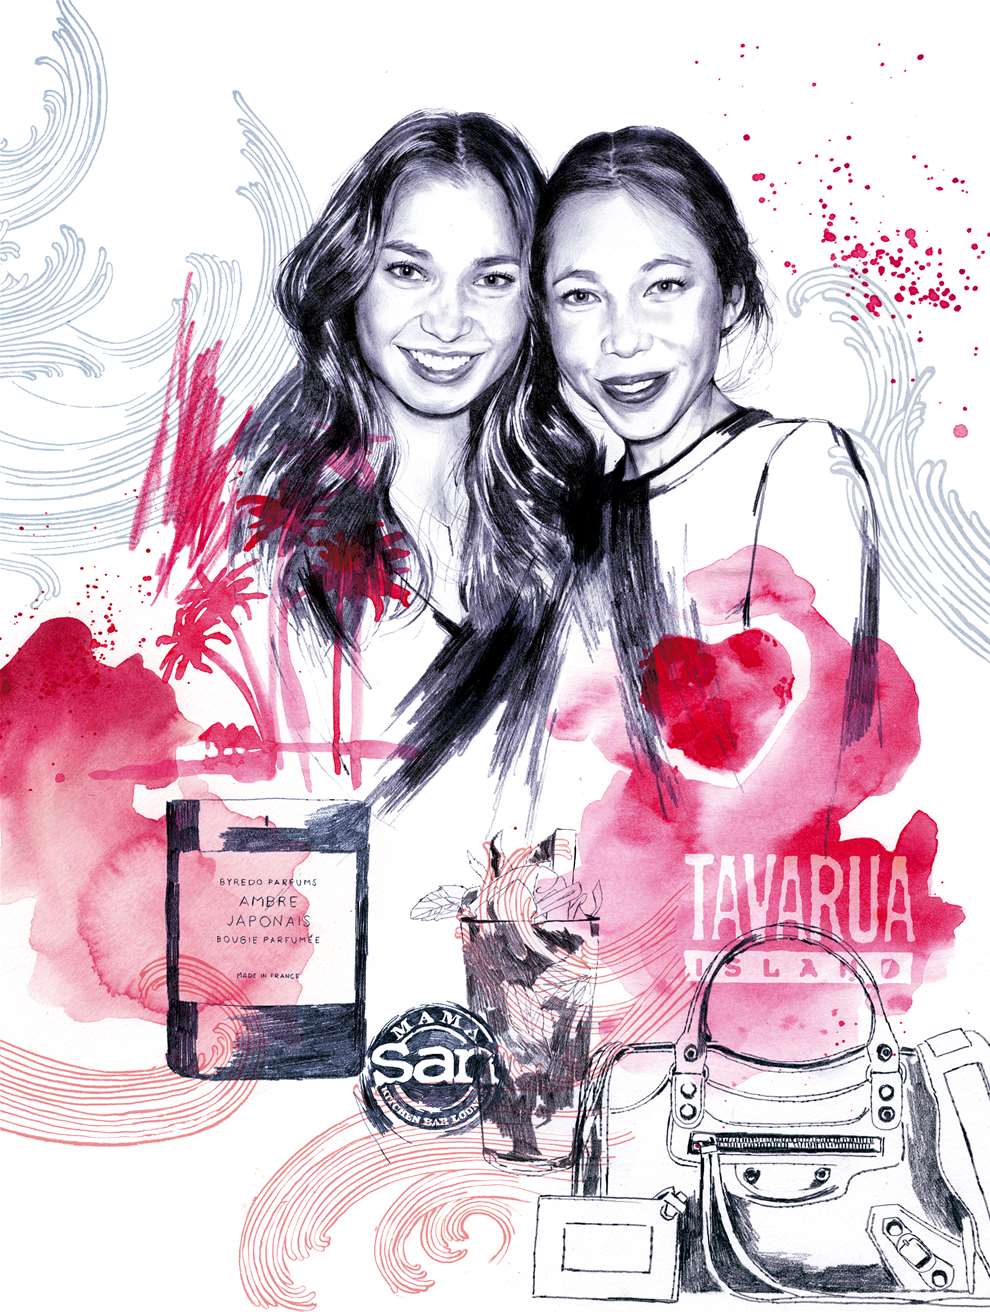 Montse Bernal, Pencil and ink portrait illustration of two women for beauty magazine surrounded by beauty products including a bag and perfume. 